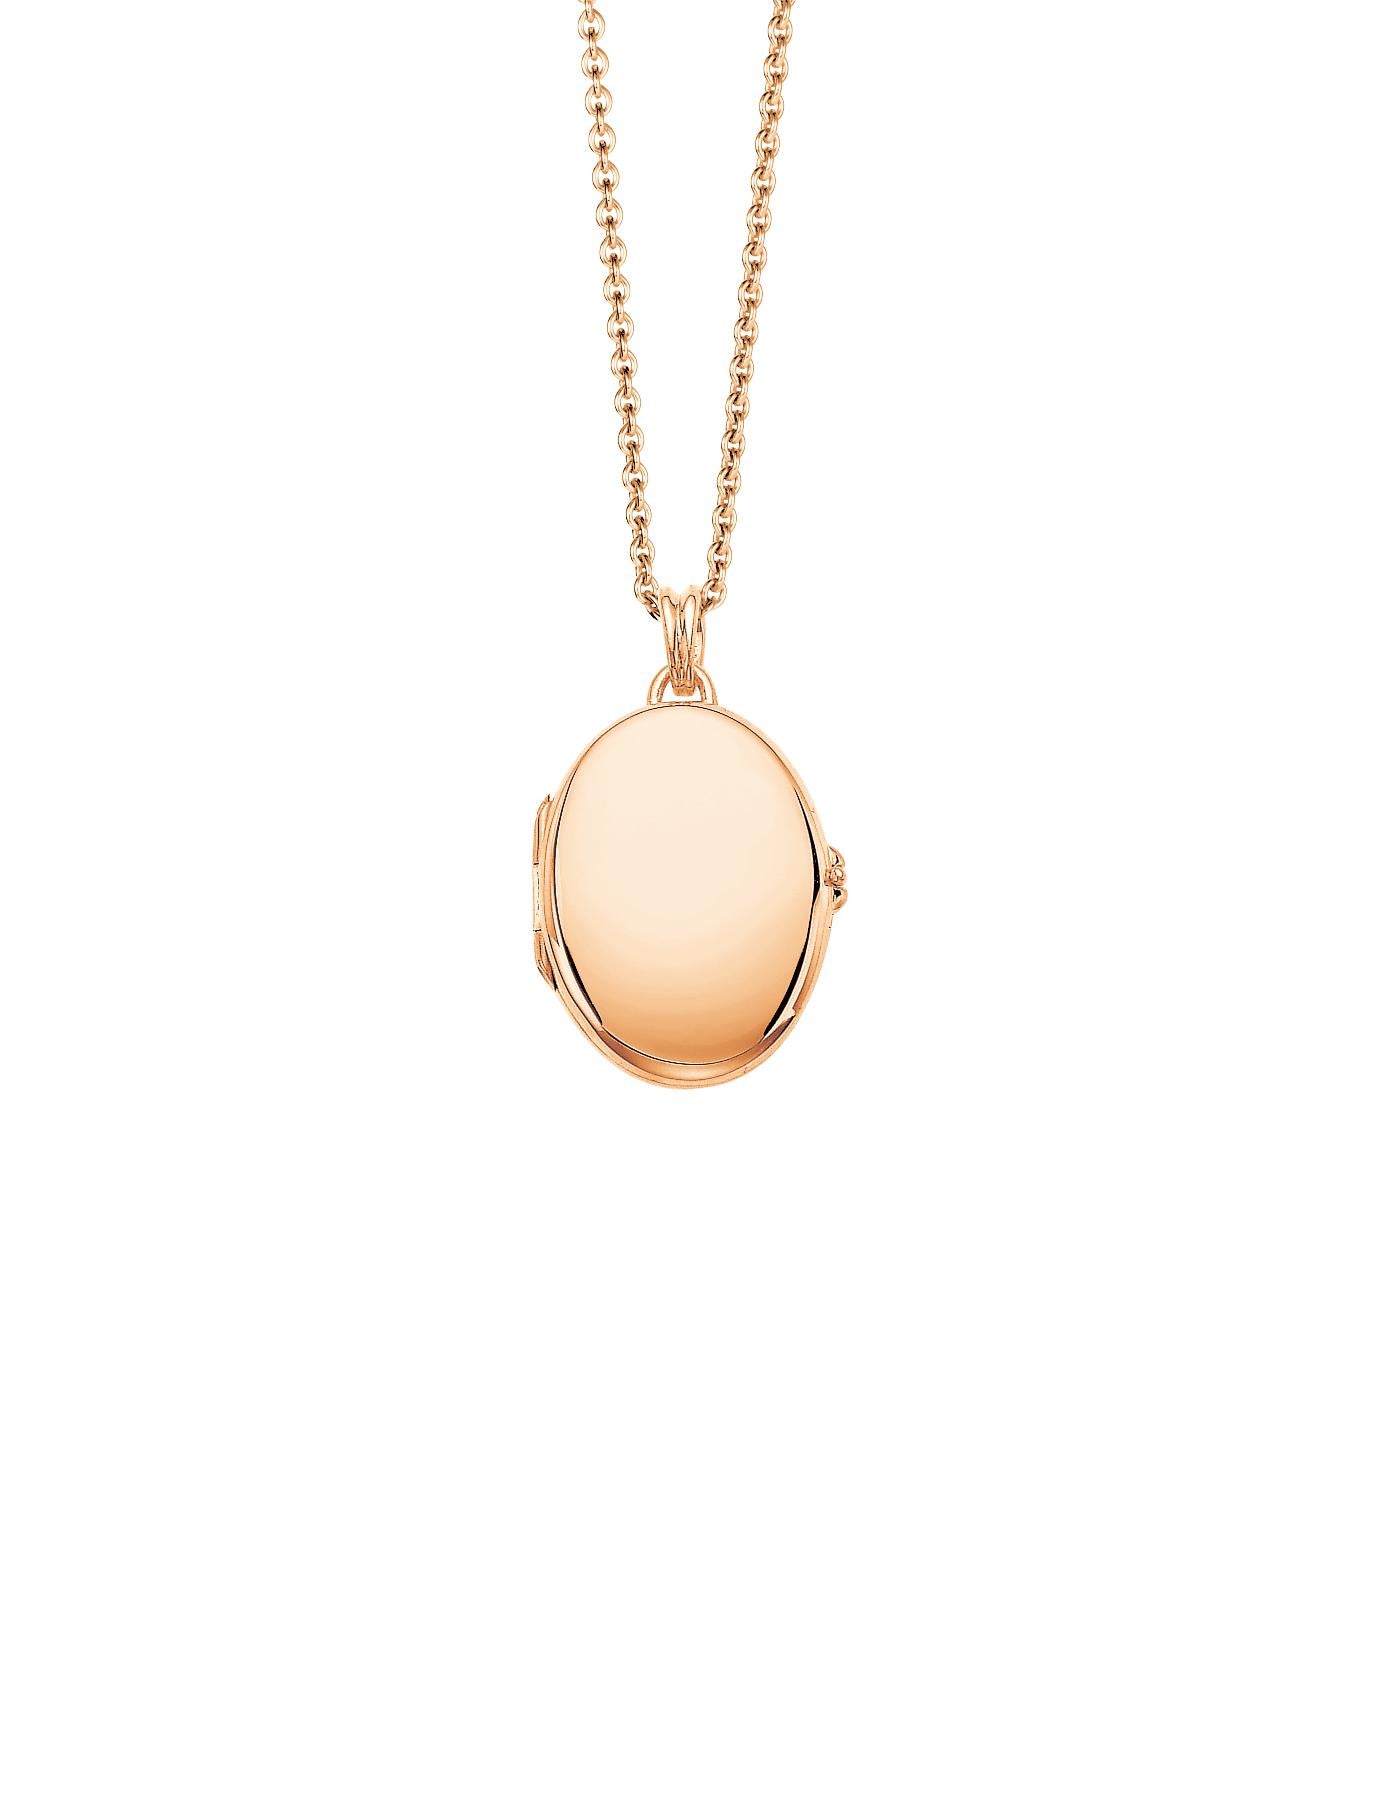 Victor Mayer customizable oval pendant locket 18k rose gold, Hallmark Collection, measurements app. 20.0 mm x 27.0 mm

About the creator Victor Mayer
Victor Mayer is internationally renowned for elegant timeless designs and unrivalled expertise in